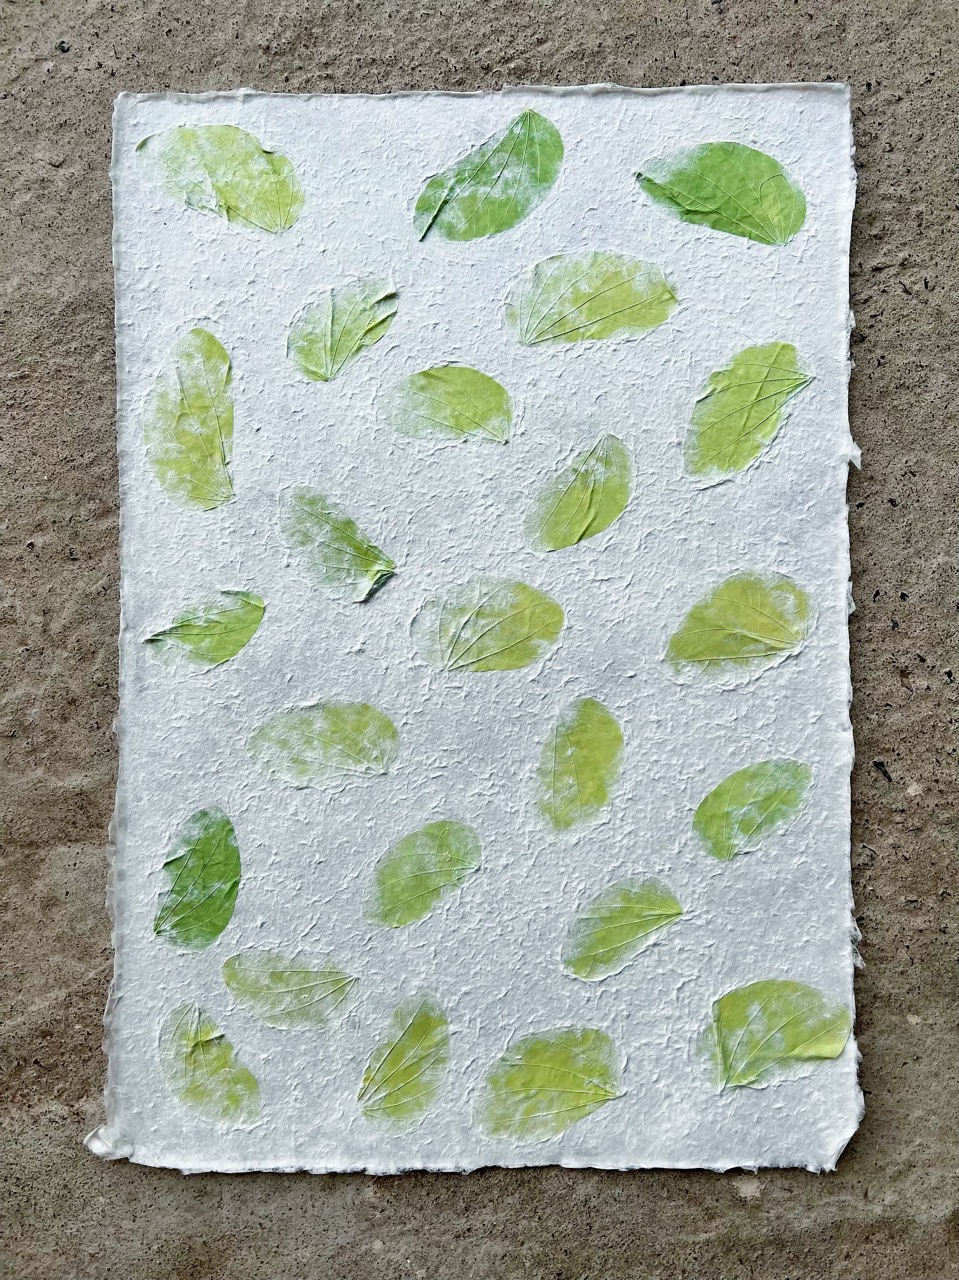 Mulberry paper with Chong-Co leaves - กระดาษสาผสมใบชงโคย้อมเขียว